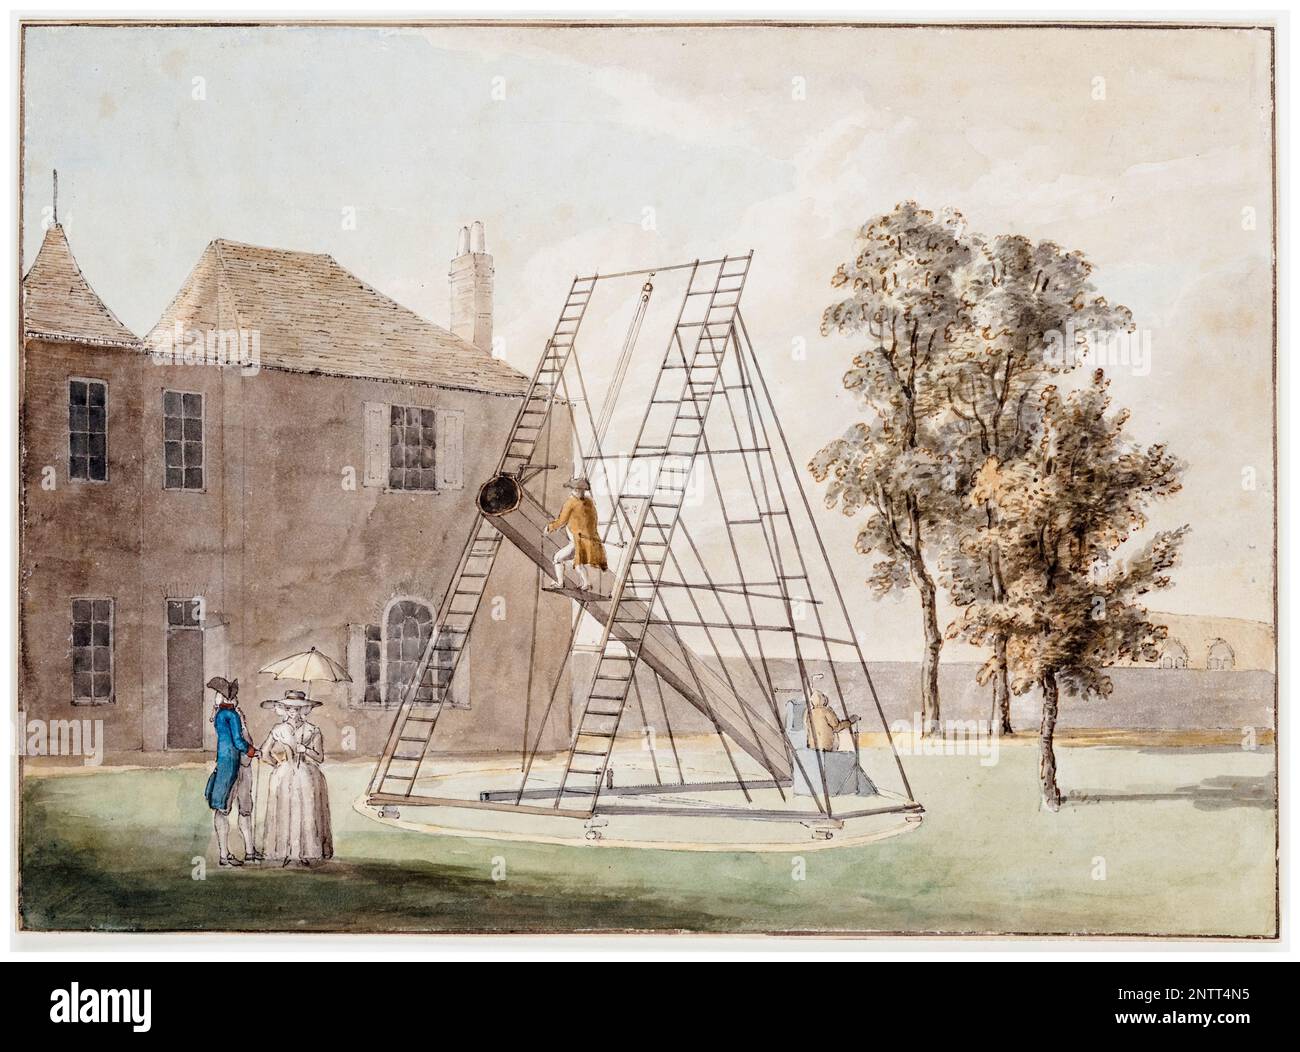 Sir William Herschel (1738-1822), exhibiting his great telescope to George III (1738-1820) at Slough in 1782, painting in watercolour by John Inigo Richards, circa 1782 Stock Photo